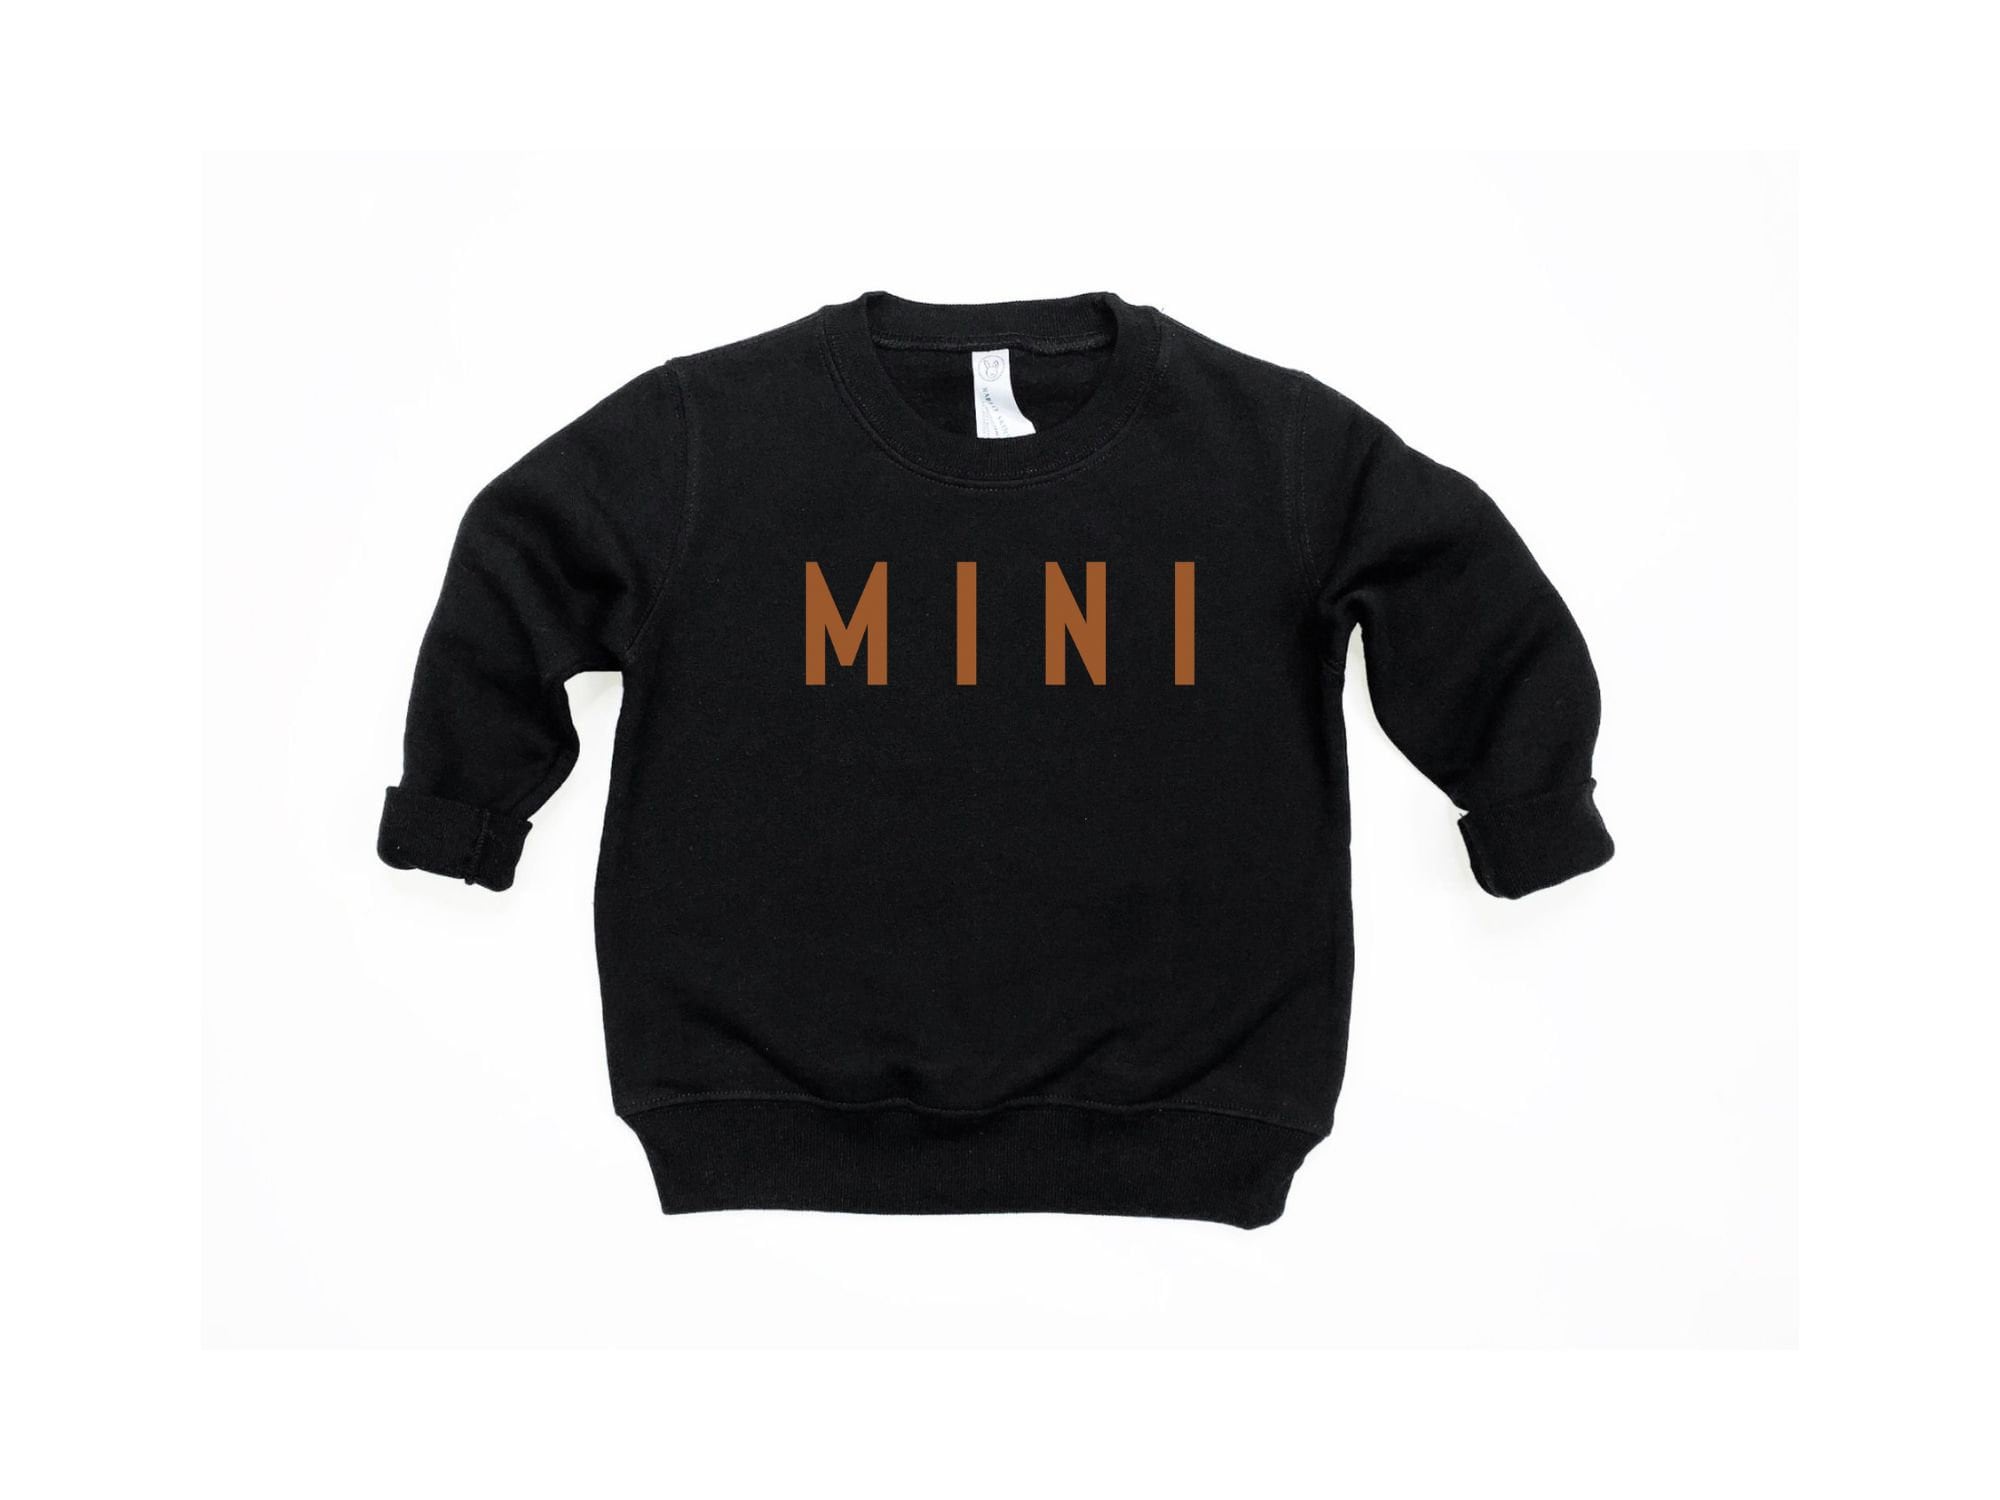 Discover Dada and Mini Fall Sweatshirts, Dad Sweatshirt, Dad and Son Outfits, Best Gifts for Dad, Dad and Daughter Sweaters, Matching Family Shirts